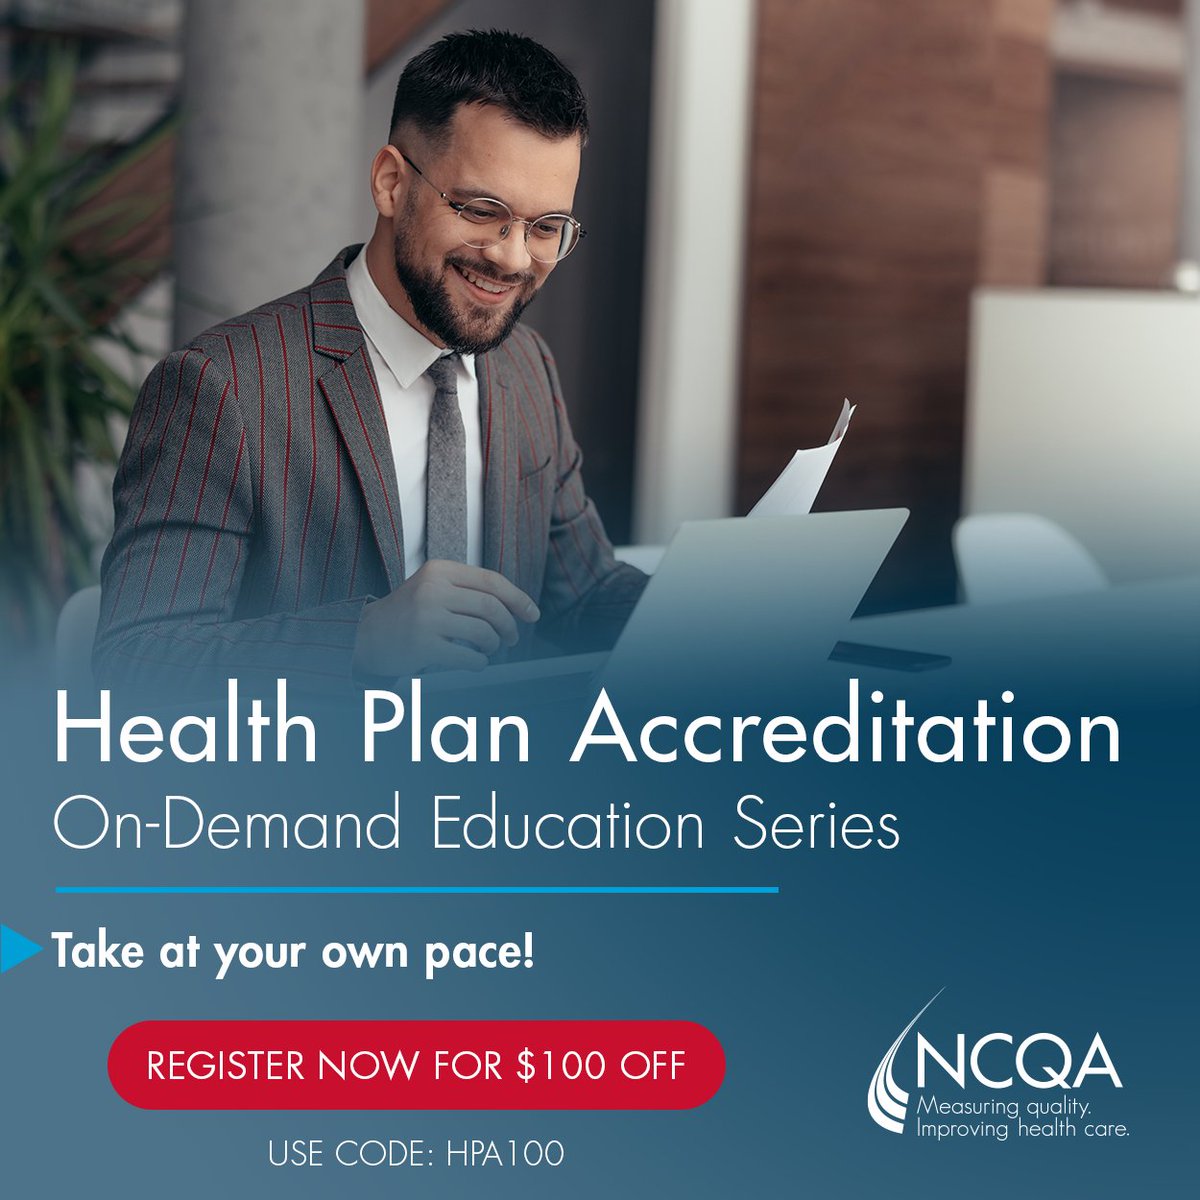 Ready to take the next step in your career? Register for our self-paced study-series focused on NCQA's Health Plan Accreditation and learn the intersection of clinical performance and customer experience (HEDIS® and CAHPS®). Enroll now and save $100: bit.ly/3xxHpor